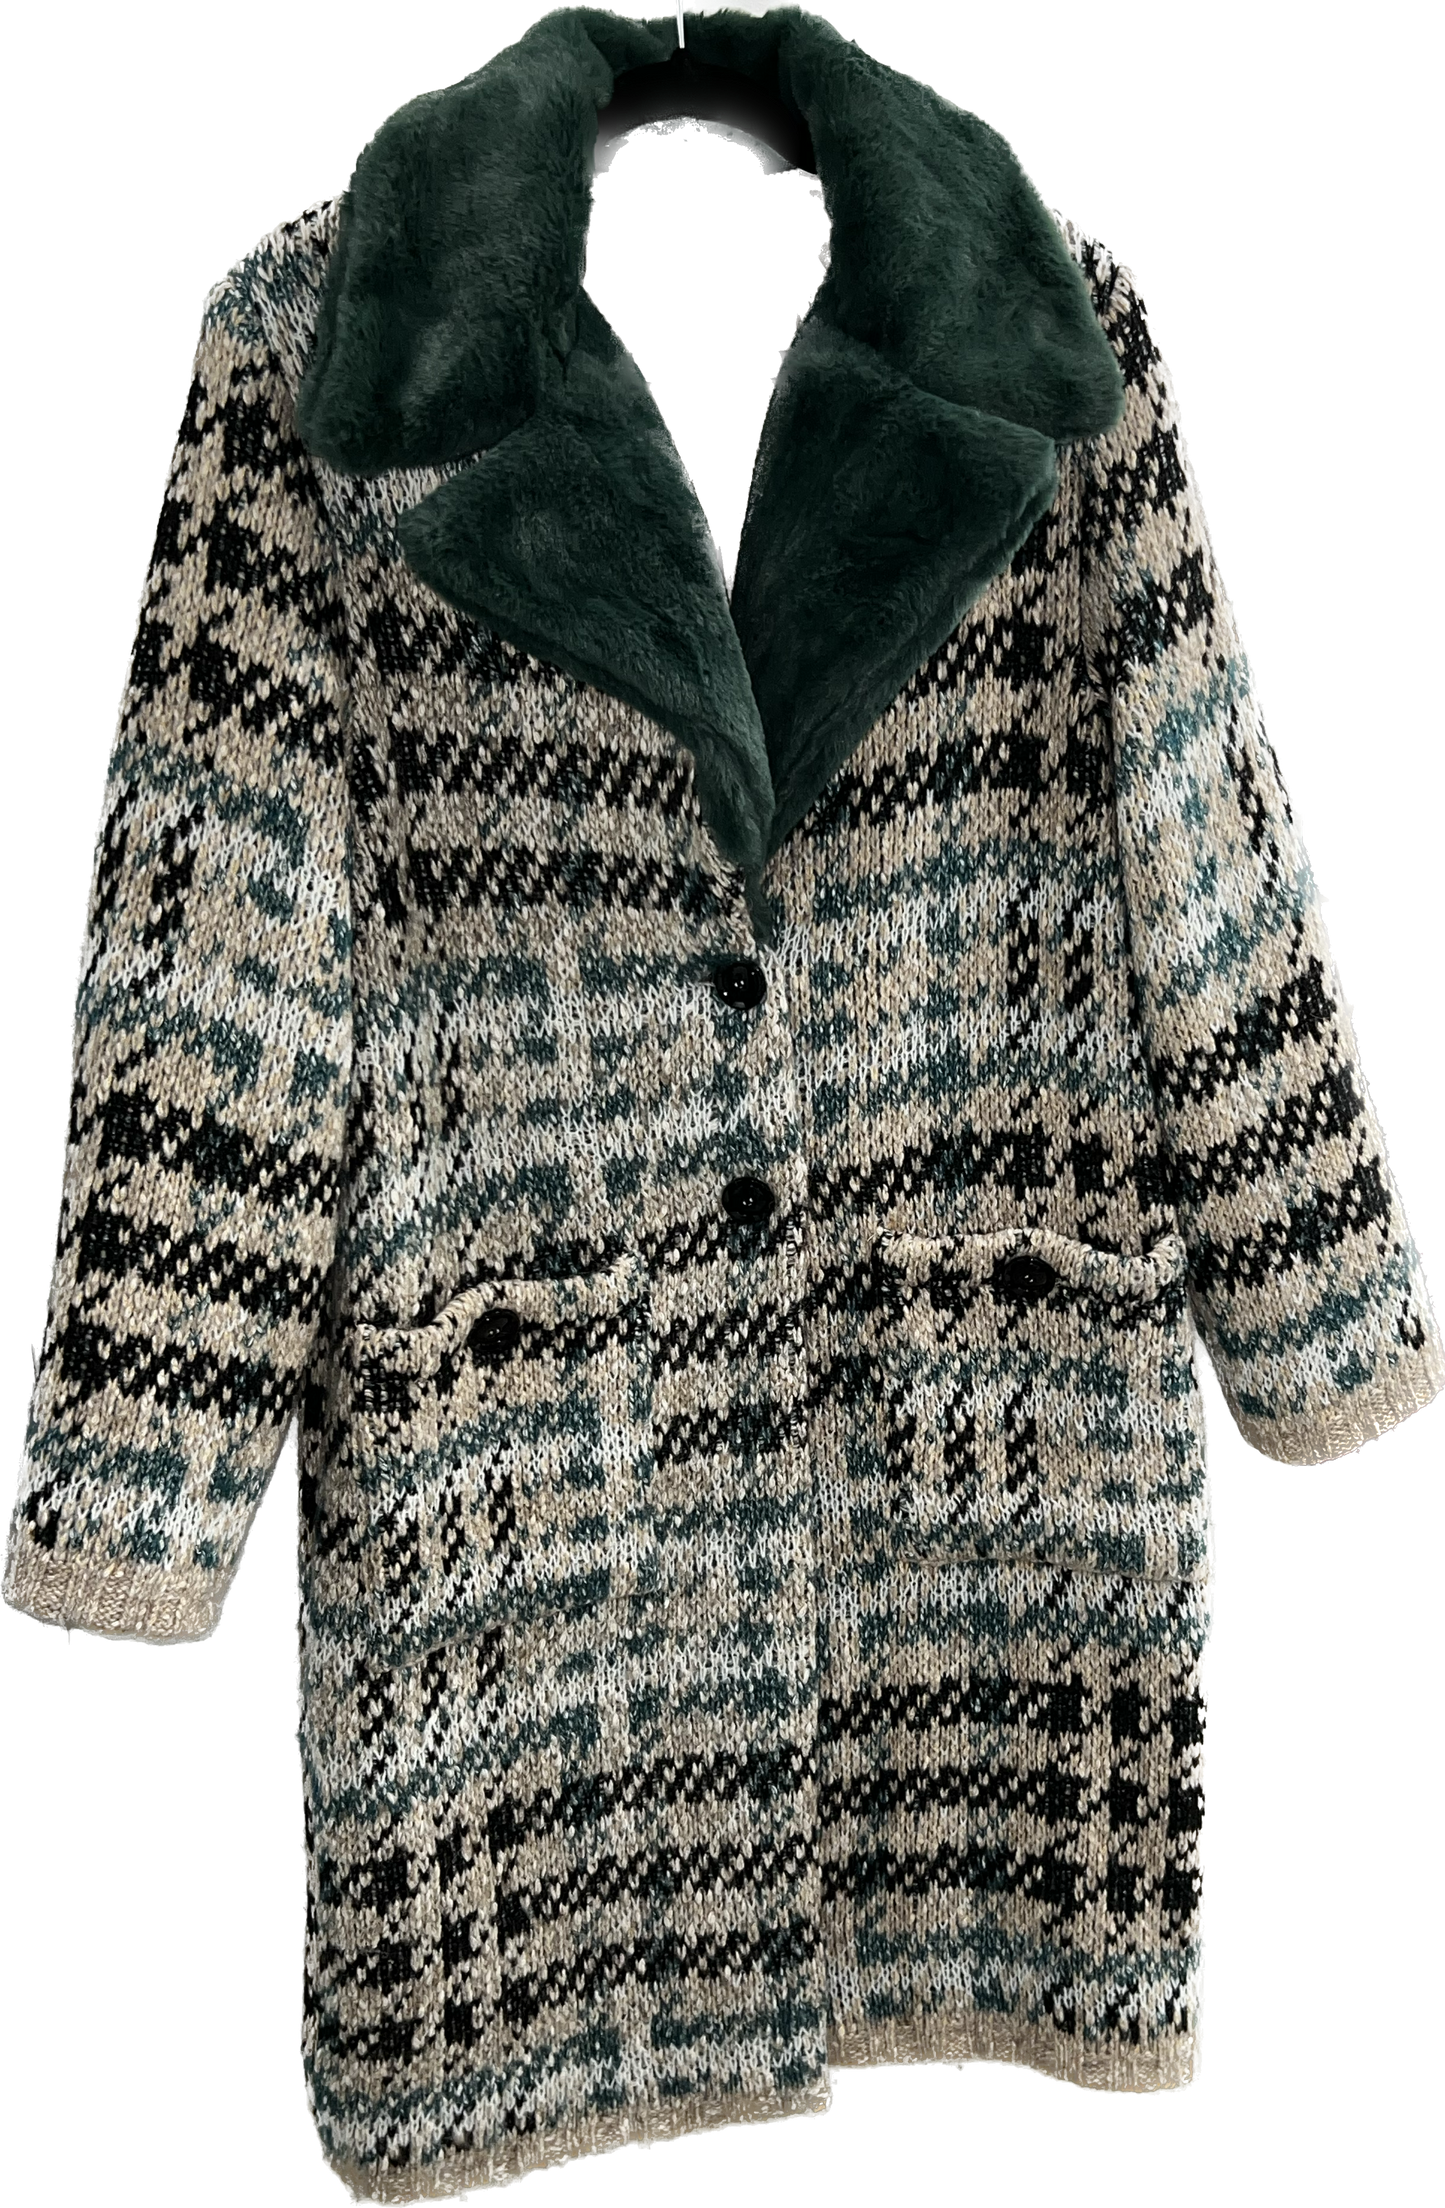 TRICOT CHIC CHECKERED COAT WITH FAUX FUR COLLAR